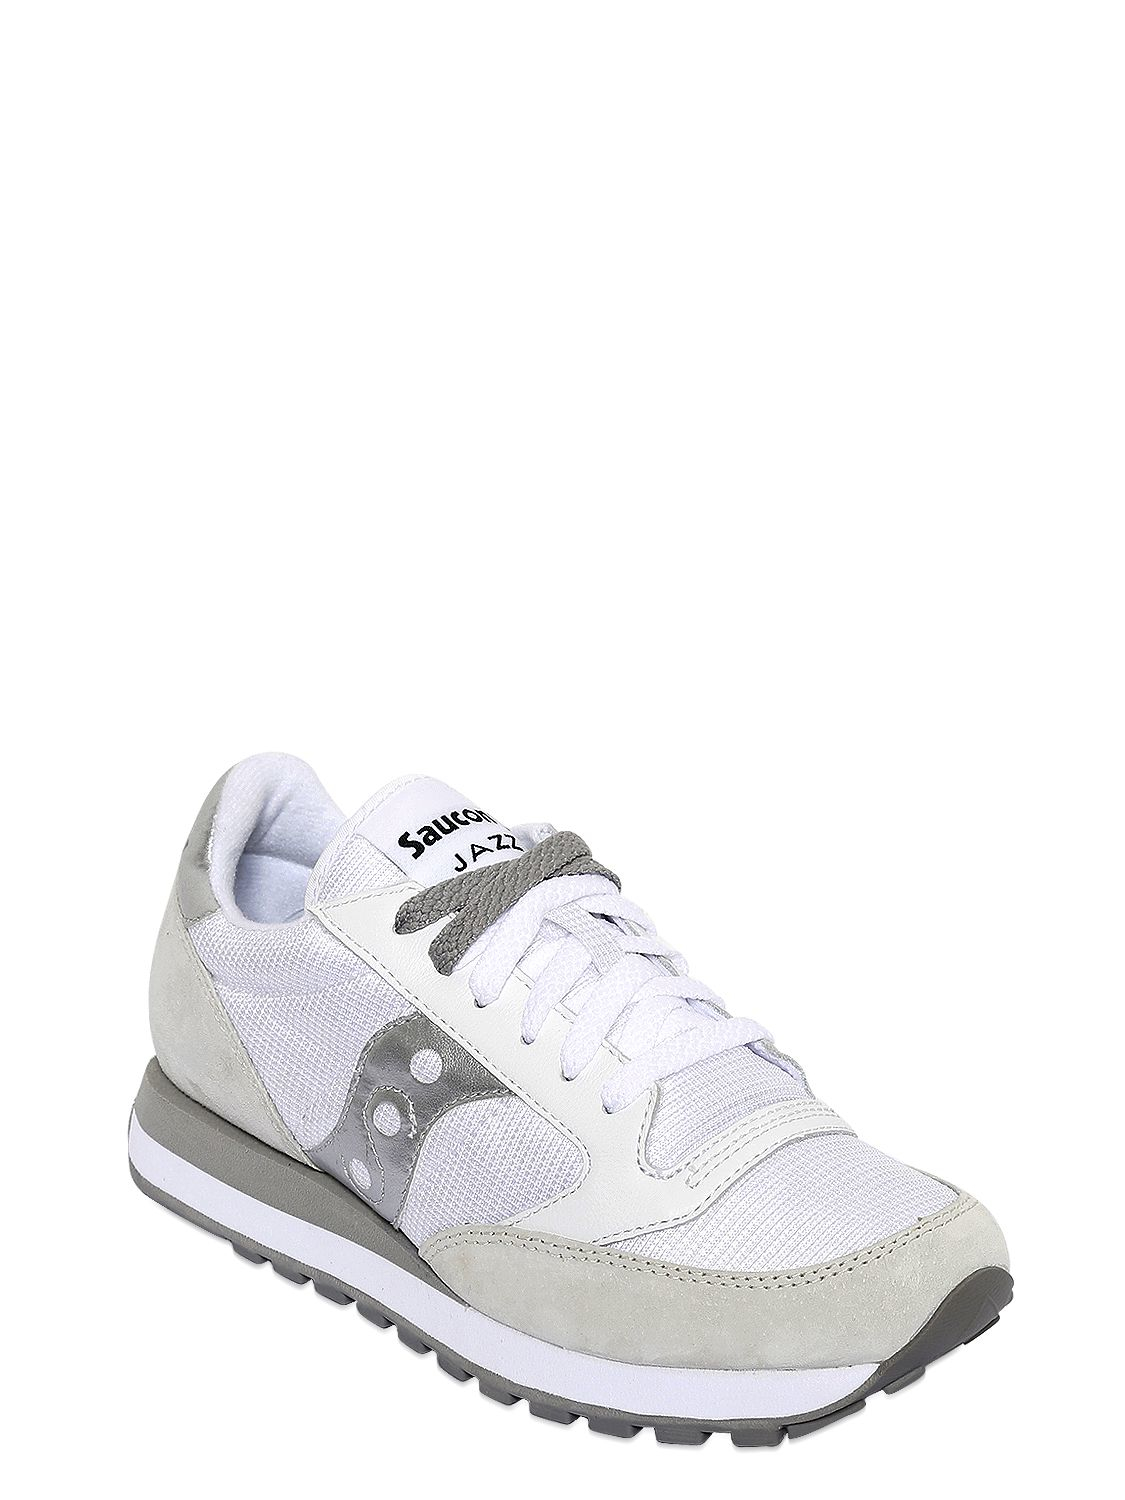 saucony sneakers white